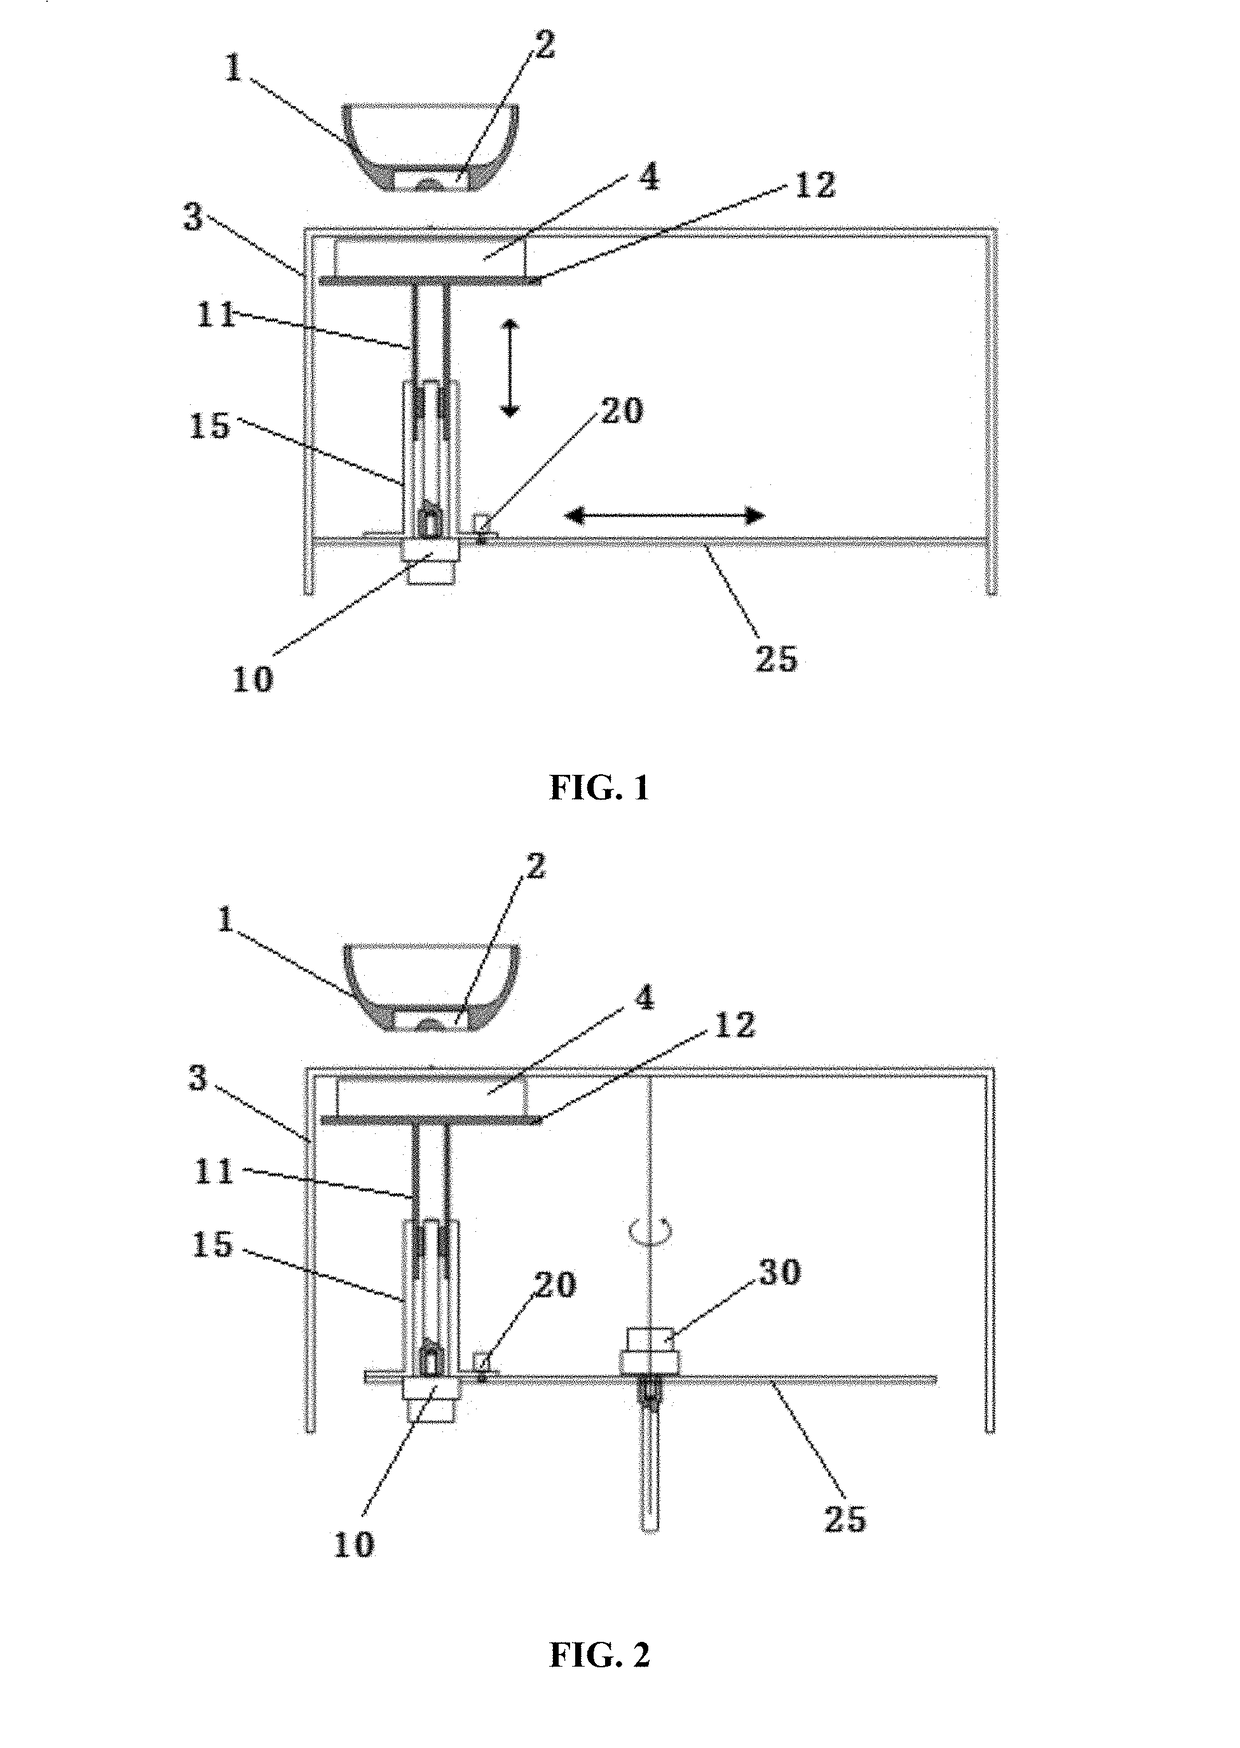 Movable type magnetic suspension apparatus